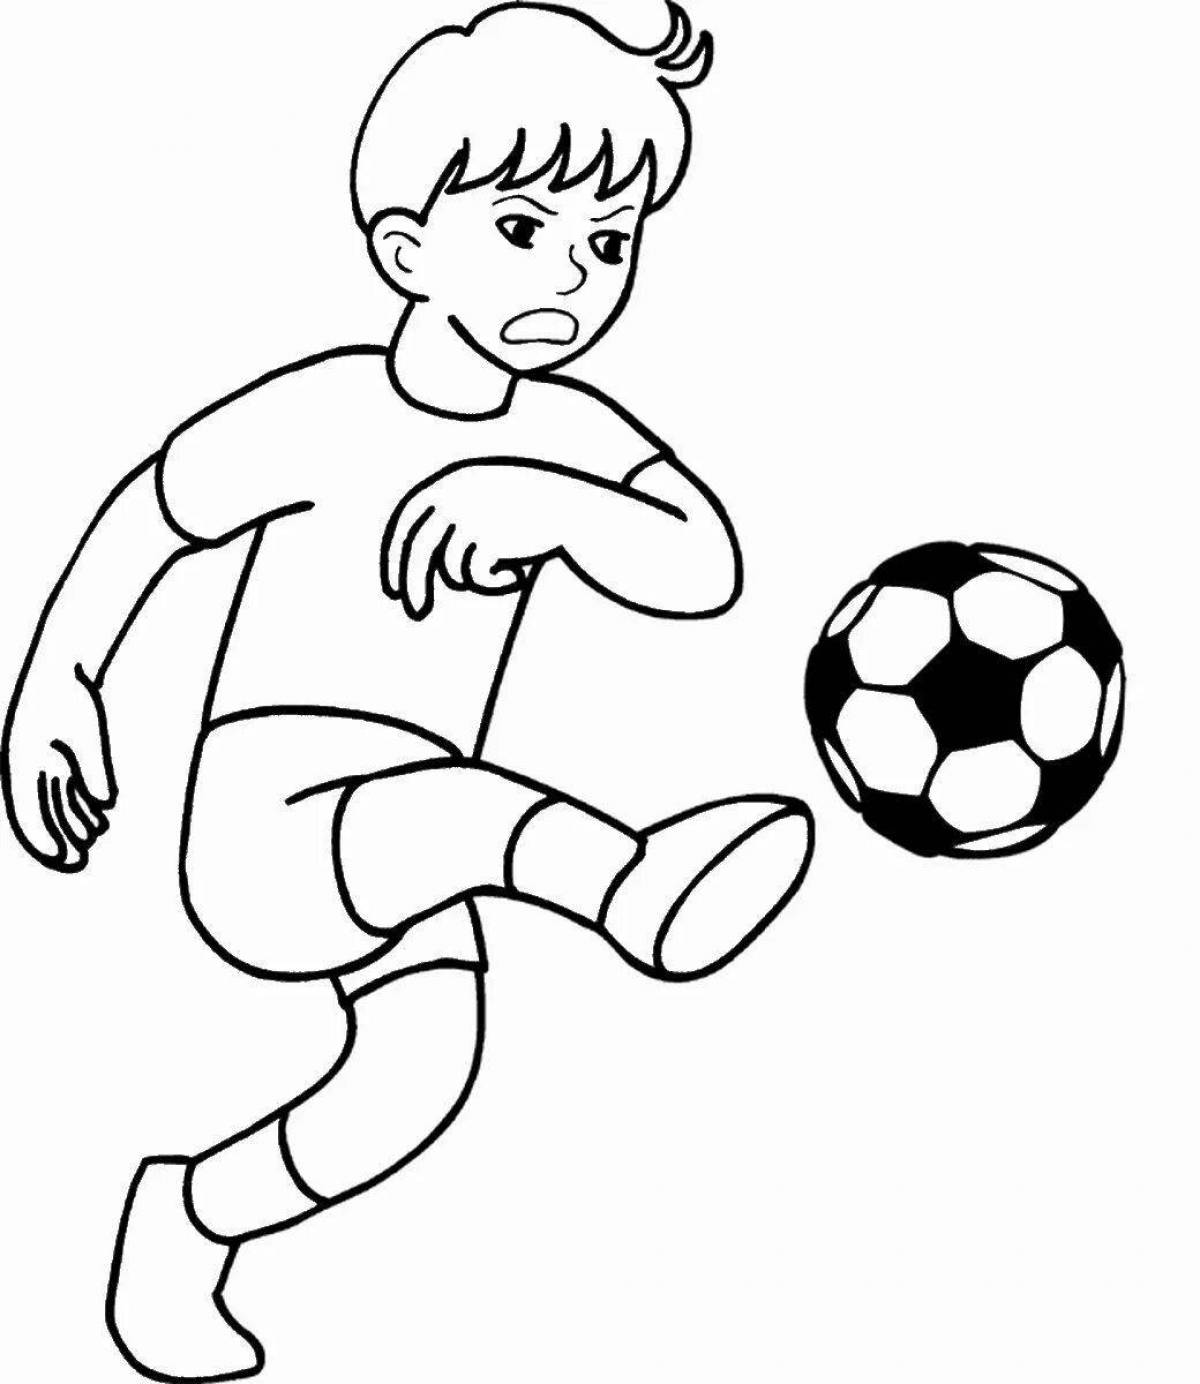 Great football coloring book